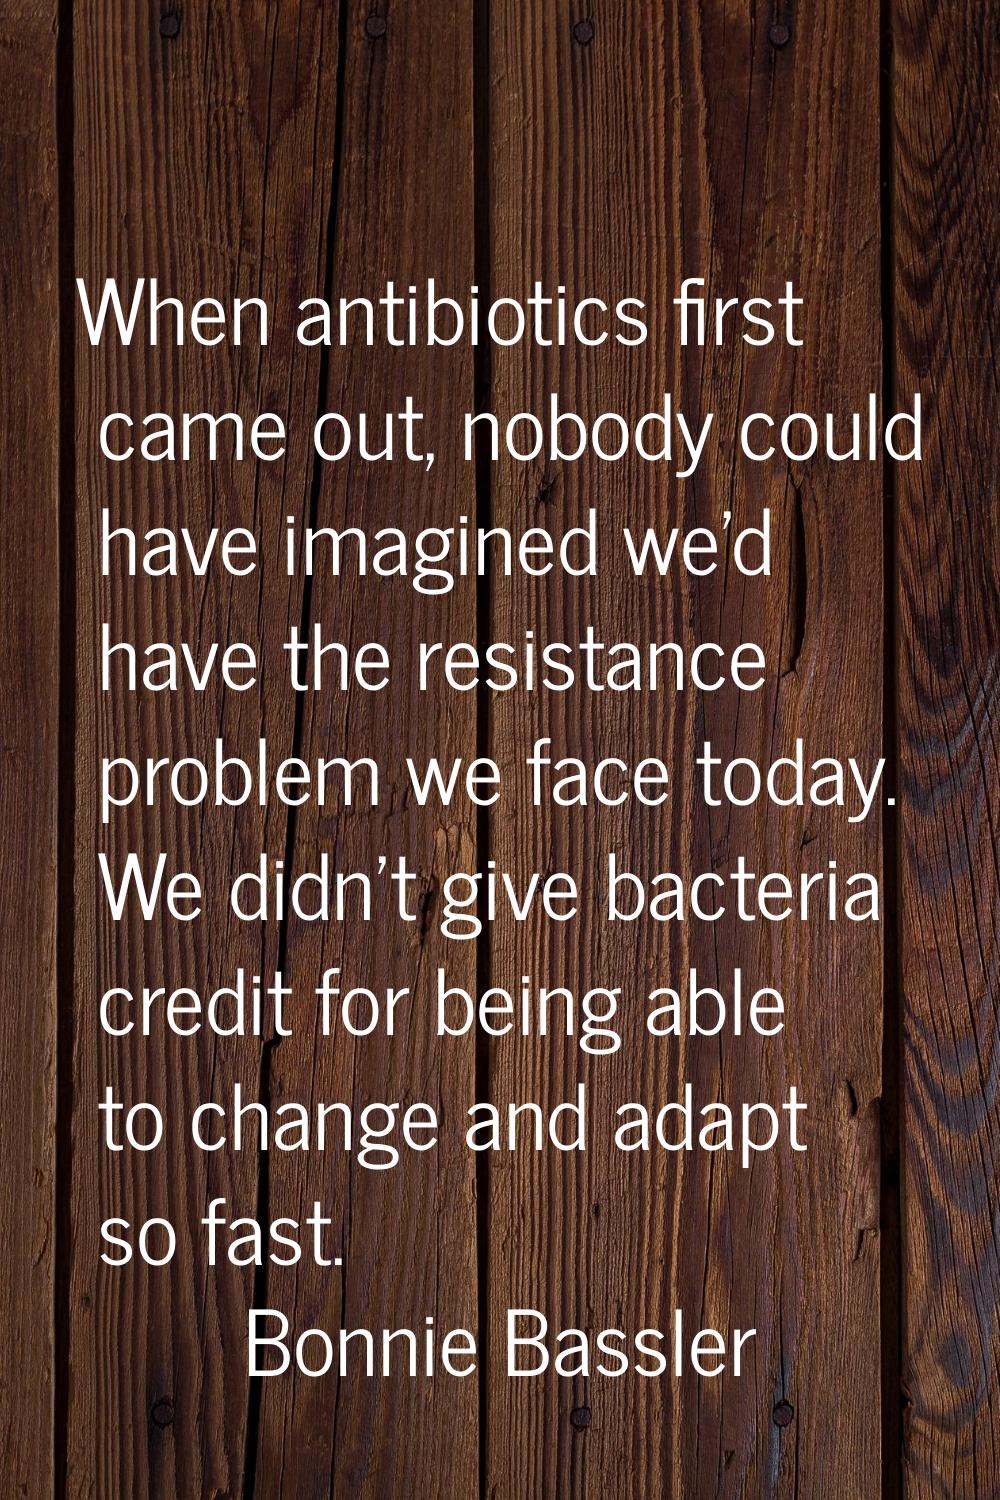 When antibiotics first came out, nobody could have imagined we'd have the resistance problem we fac